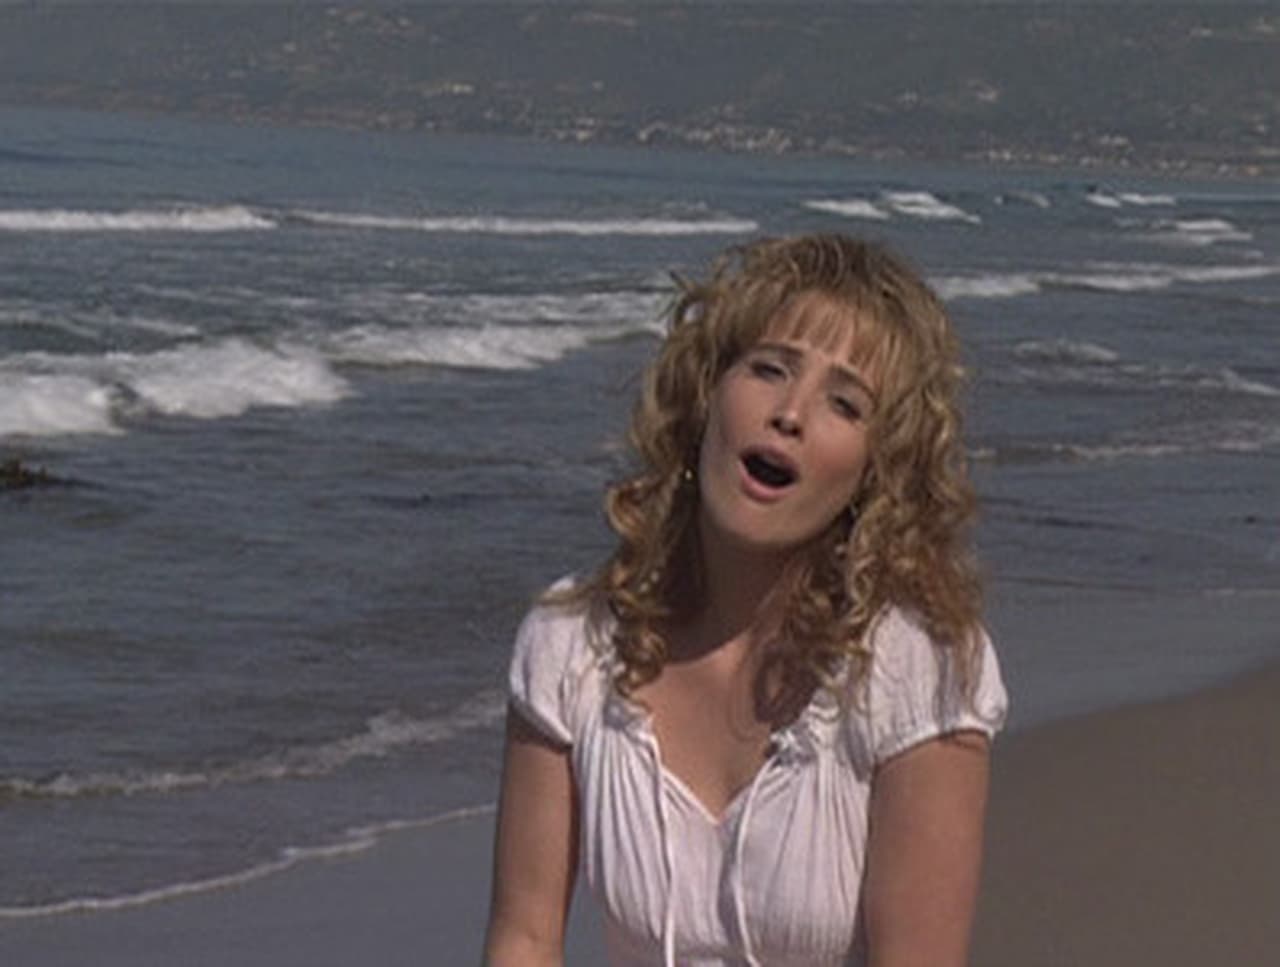 How I Met Your Mother - Season 0 Episode 2 : Robin Sparkles Music Video - Sandcastles In the Sand